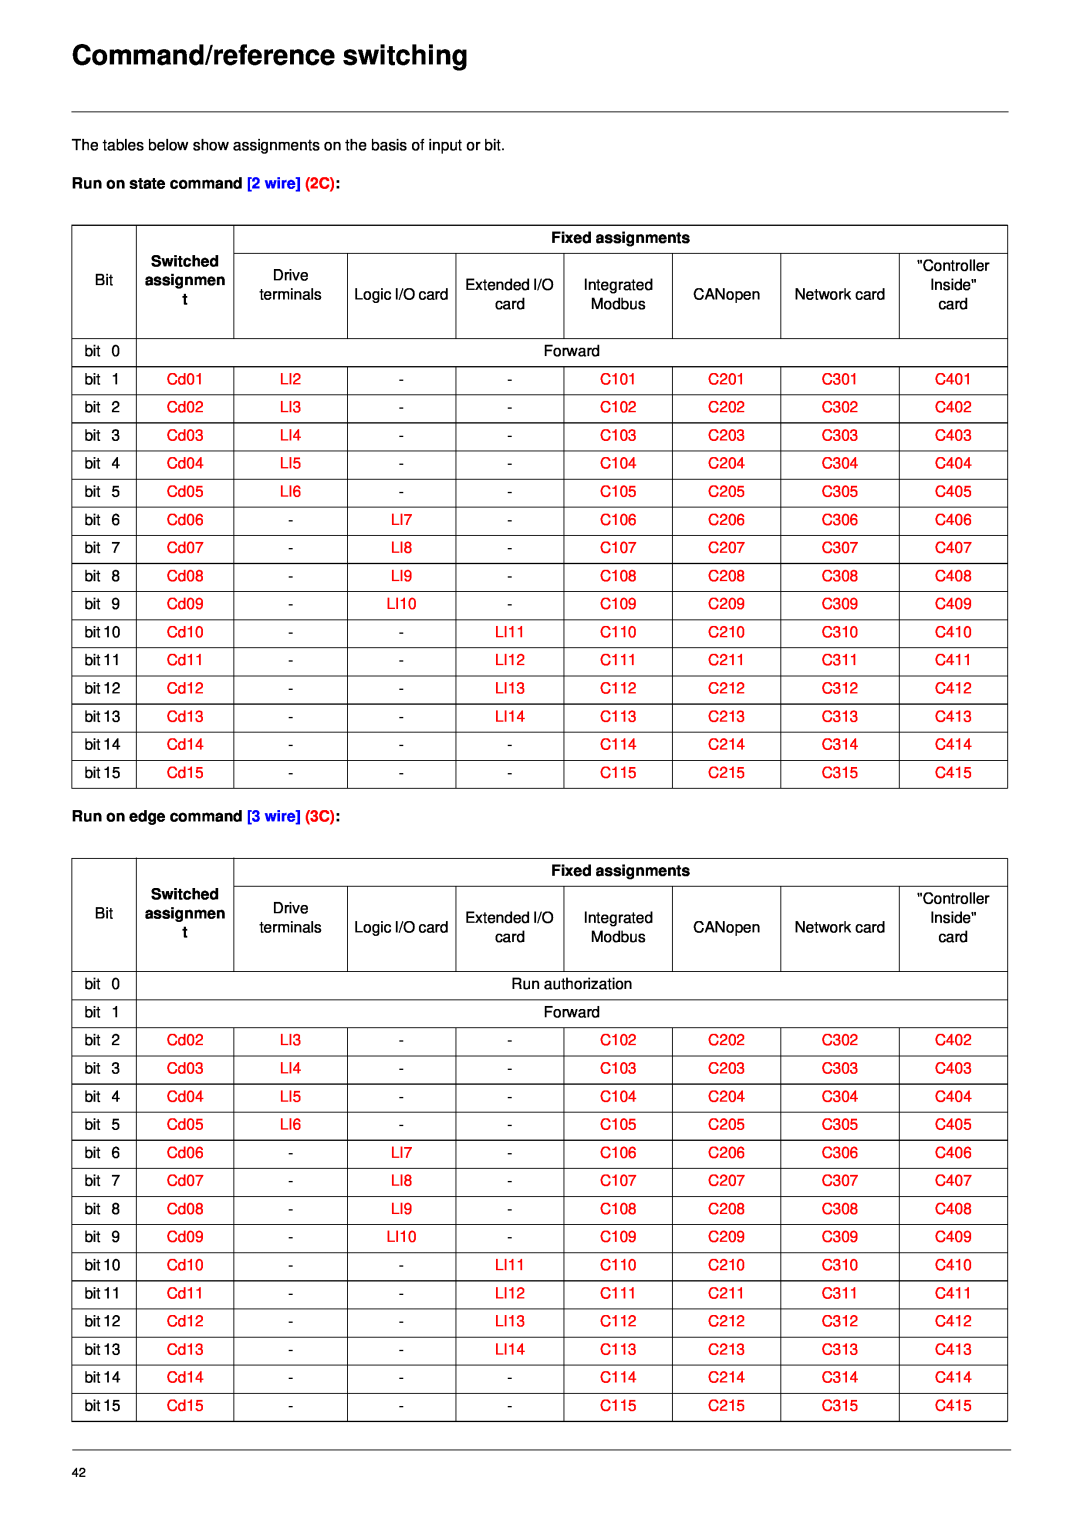 Schneider Electric 61 Command/reference switching, The tables below show assignments on the basis of input or bit 